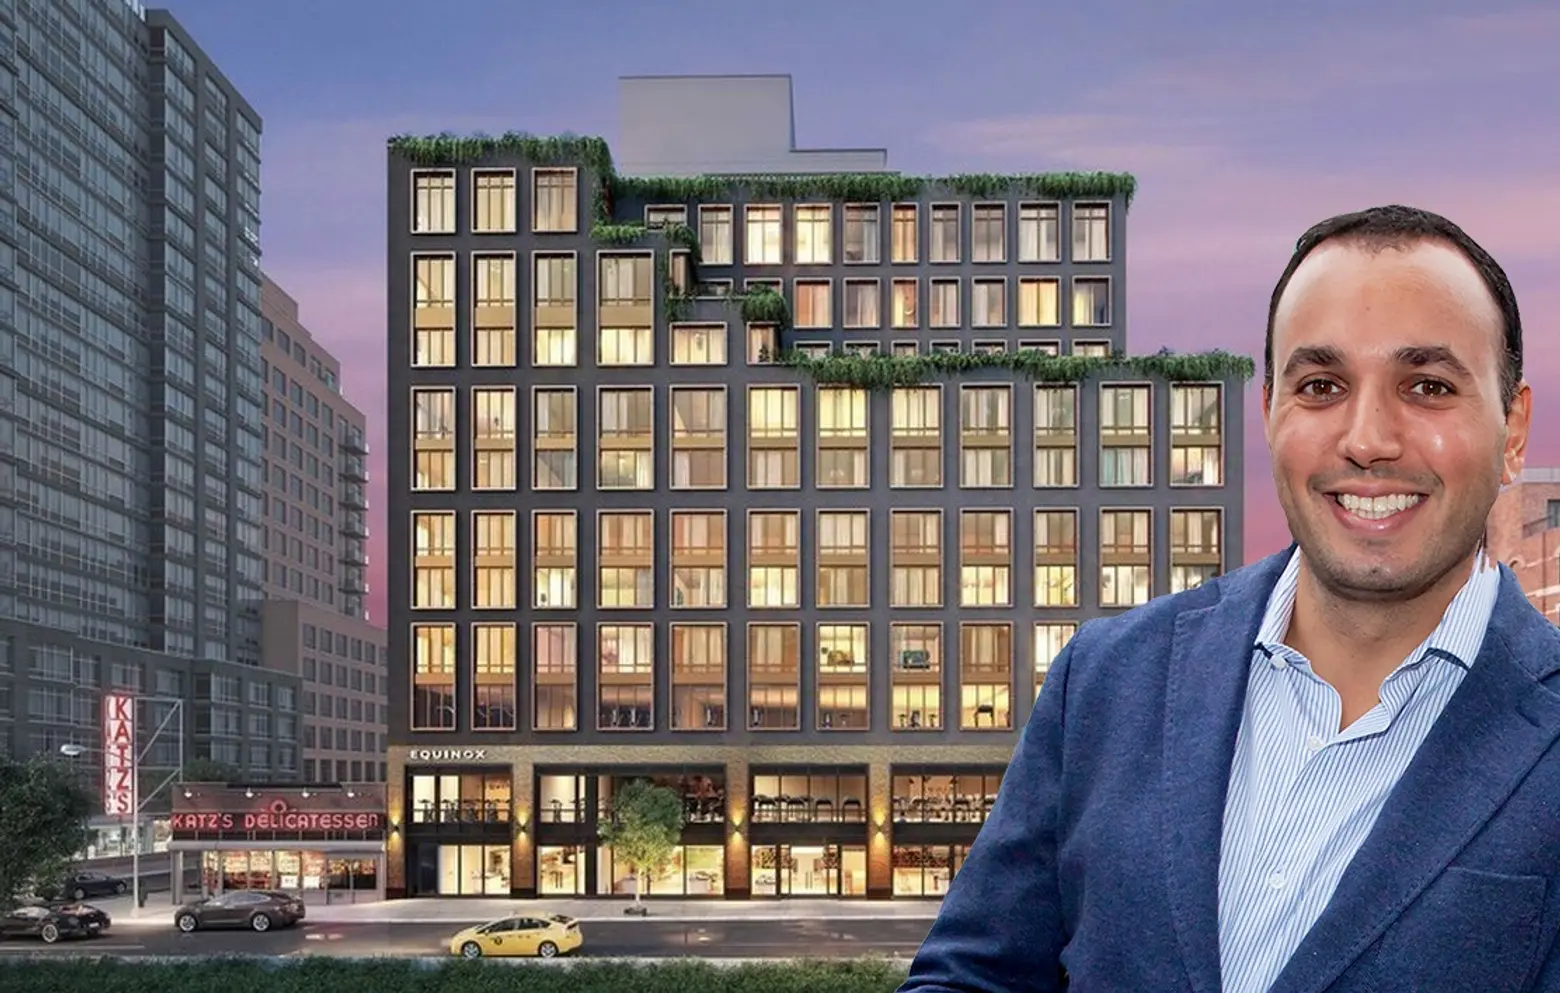 Interview: Developer Ben Shaoul on 196 Orchard Street, his Lower East Side condo rising next to Katz’s